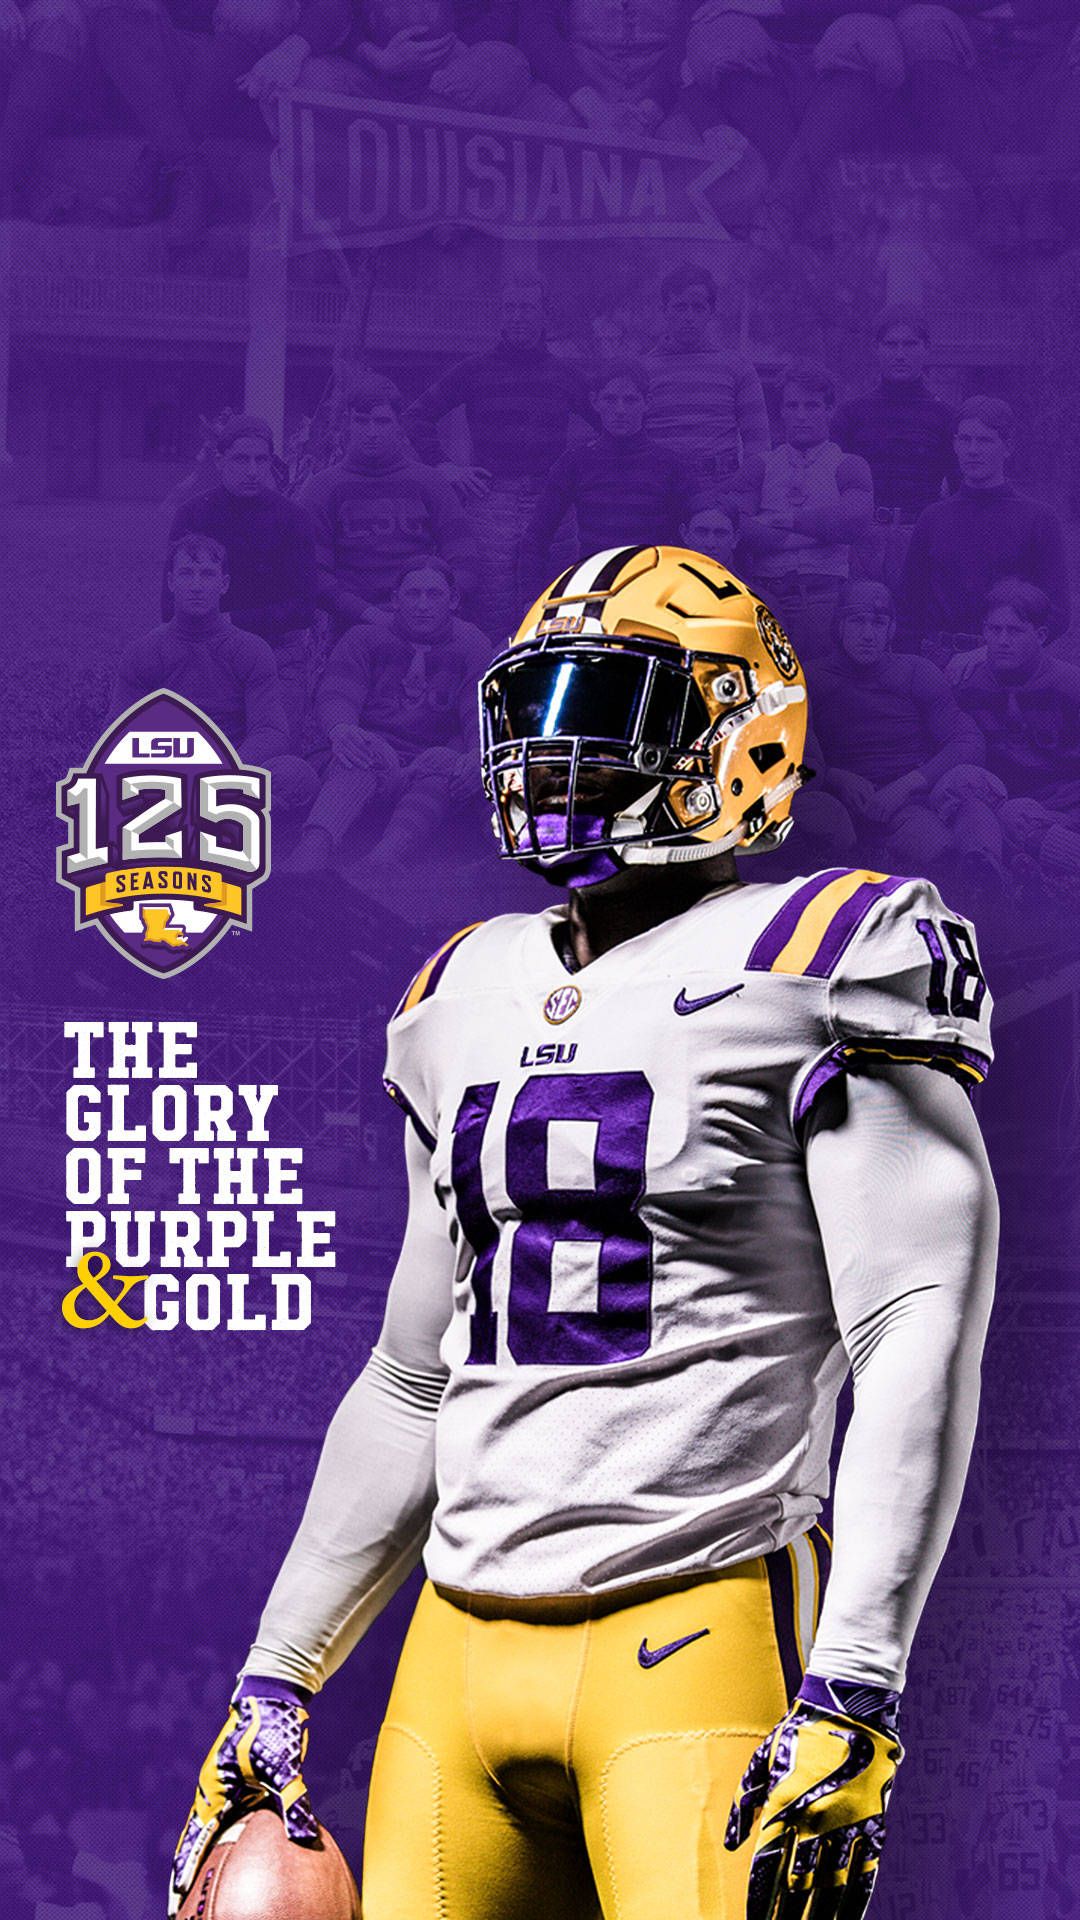 2018 19 LSU Athletics Wallpaper, Social Covers.net Official Web Site Of LSU Tigers Athletics